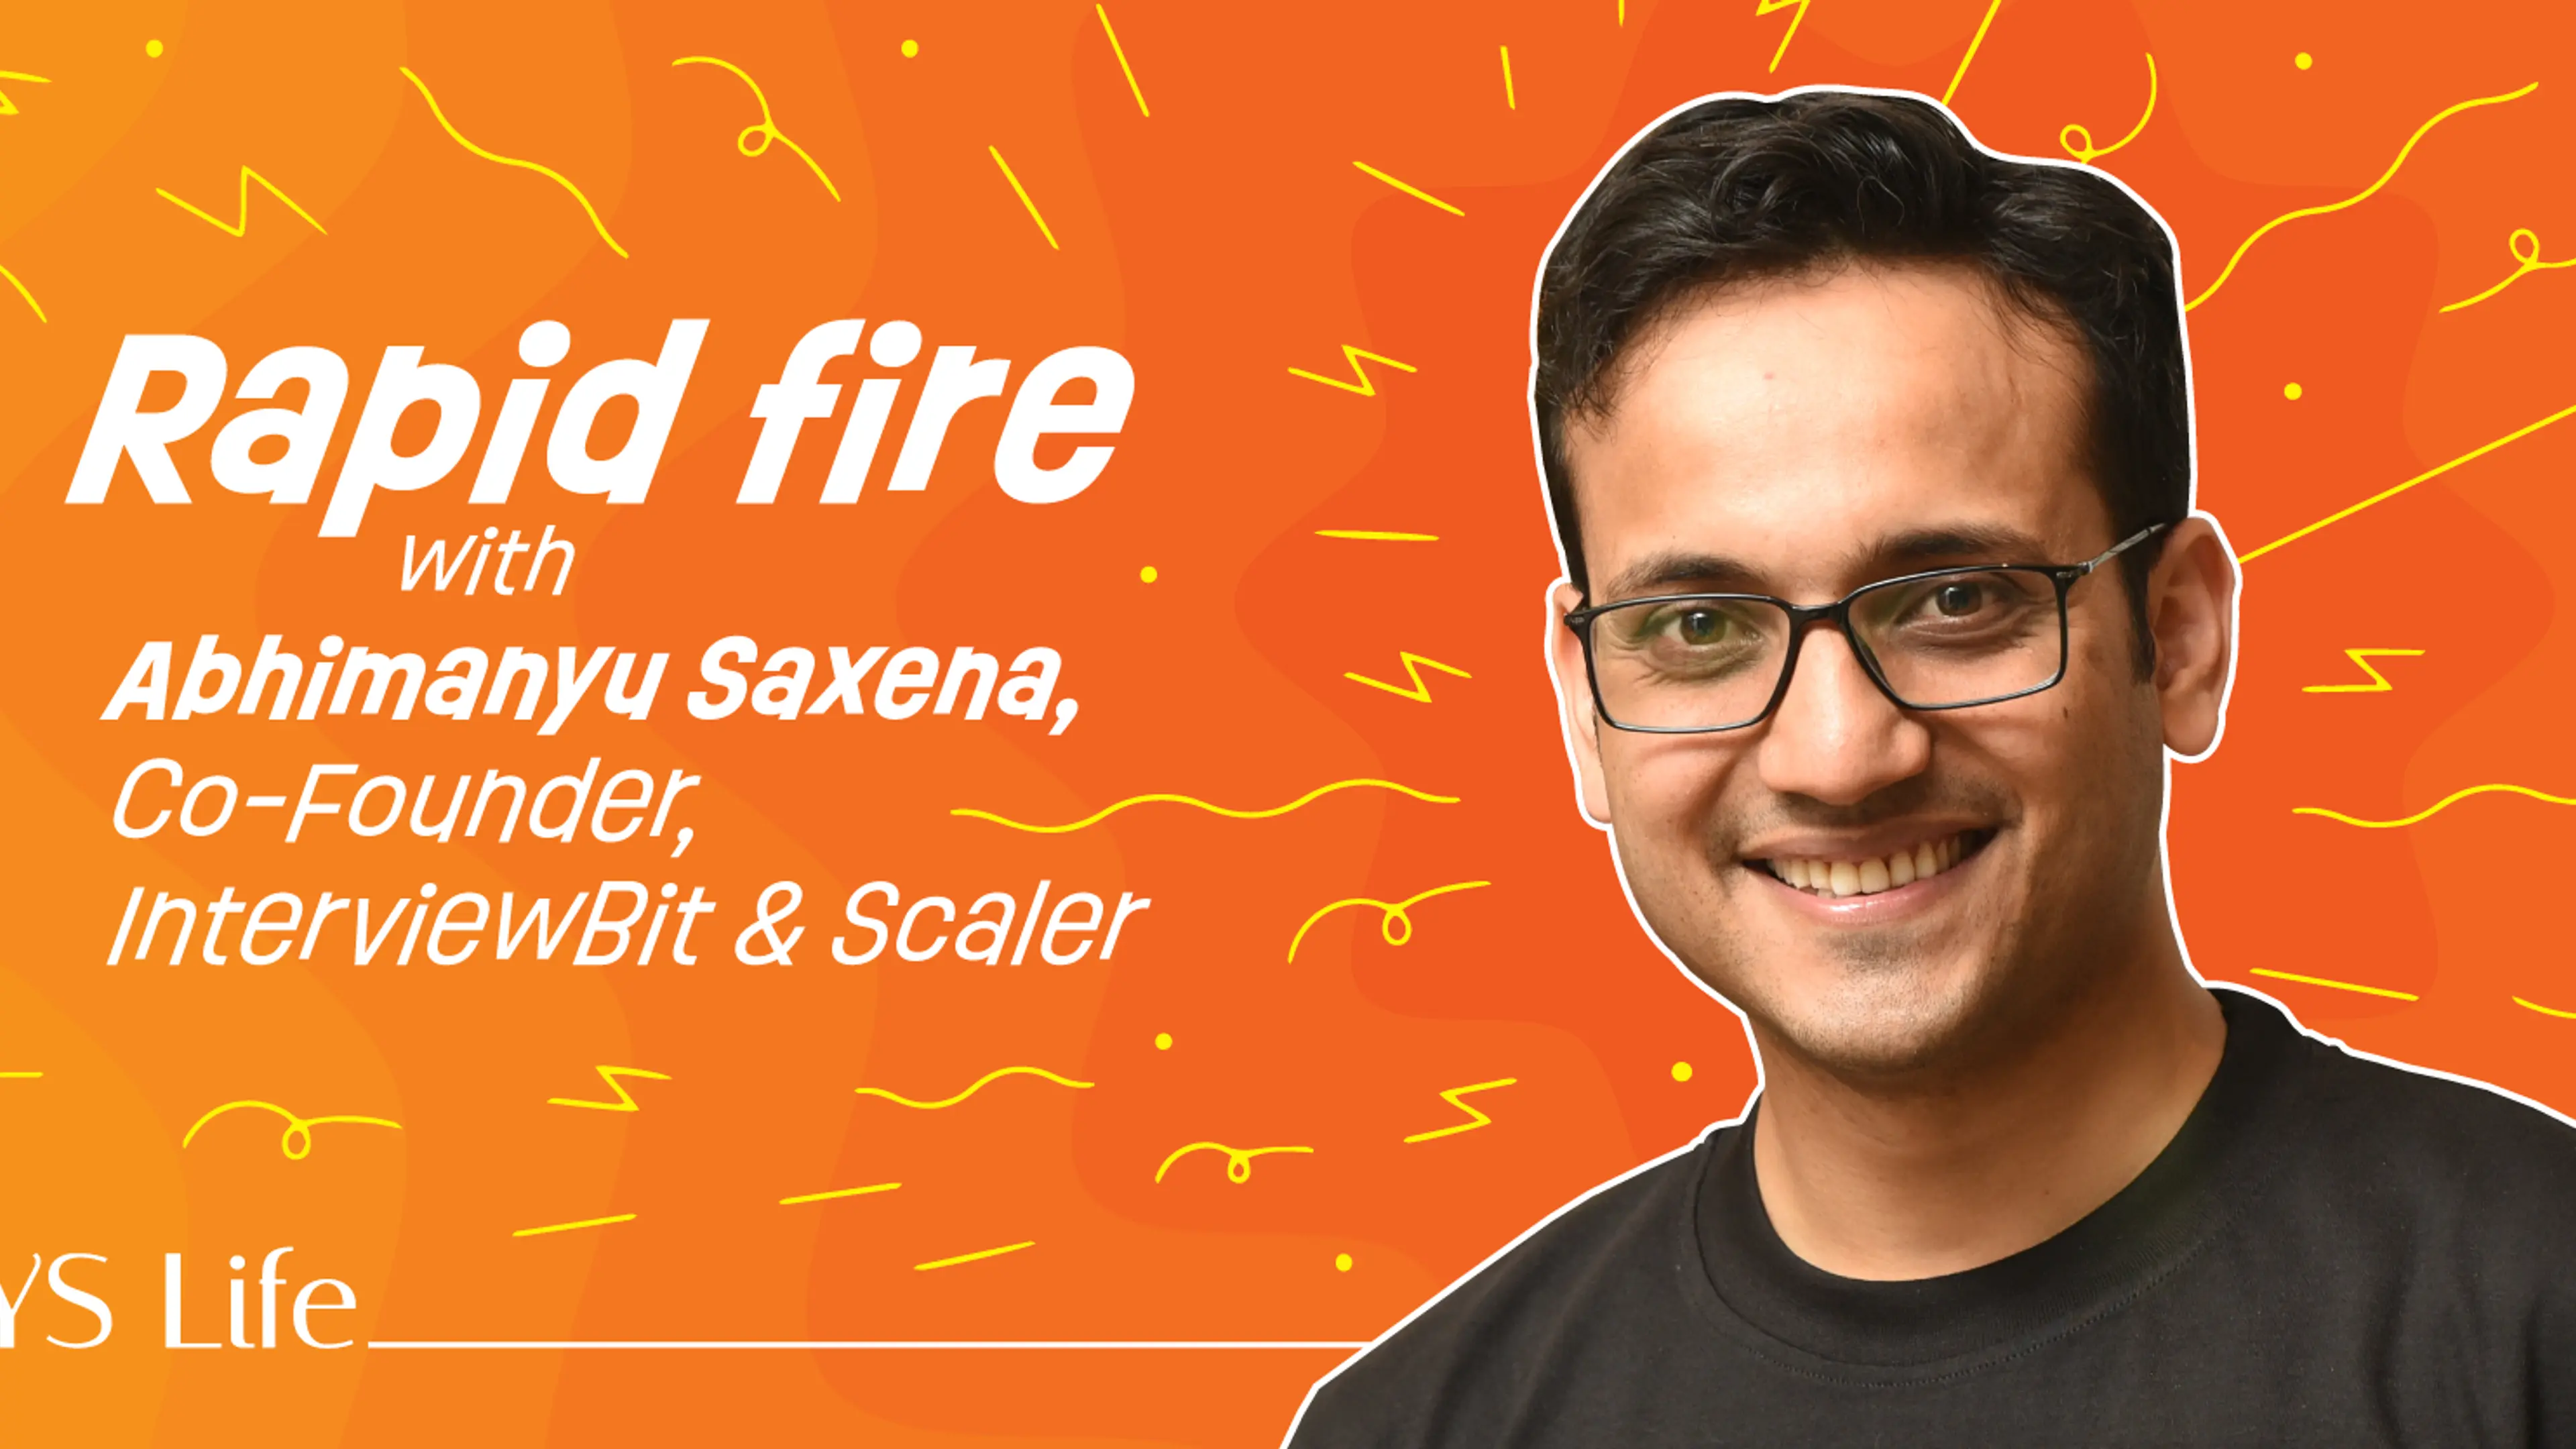 Rapid fire with Abhimanyu Saxena, Co-founder of InterviewBit and Scaler 